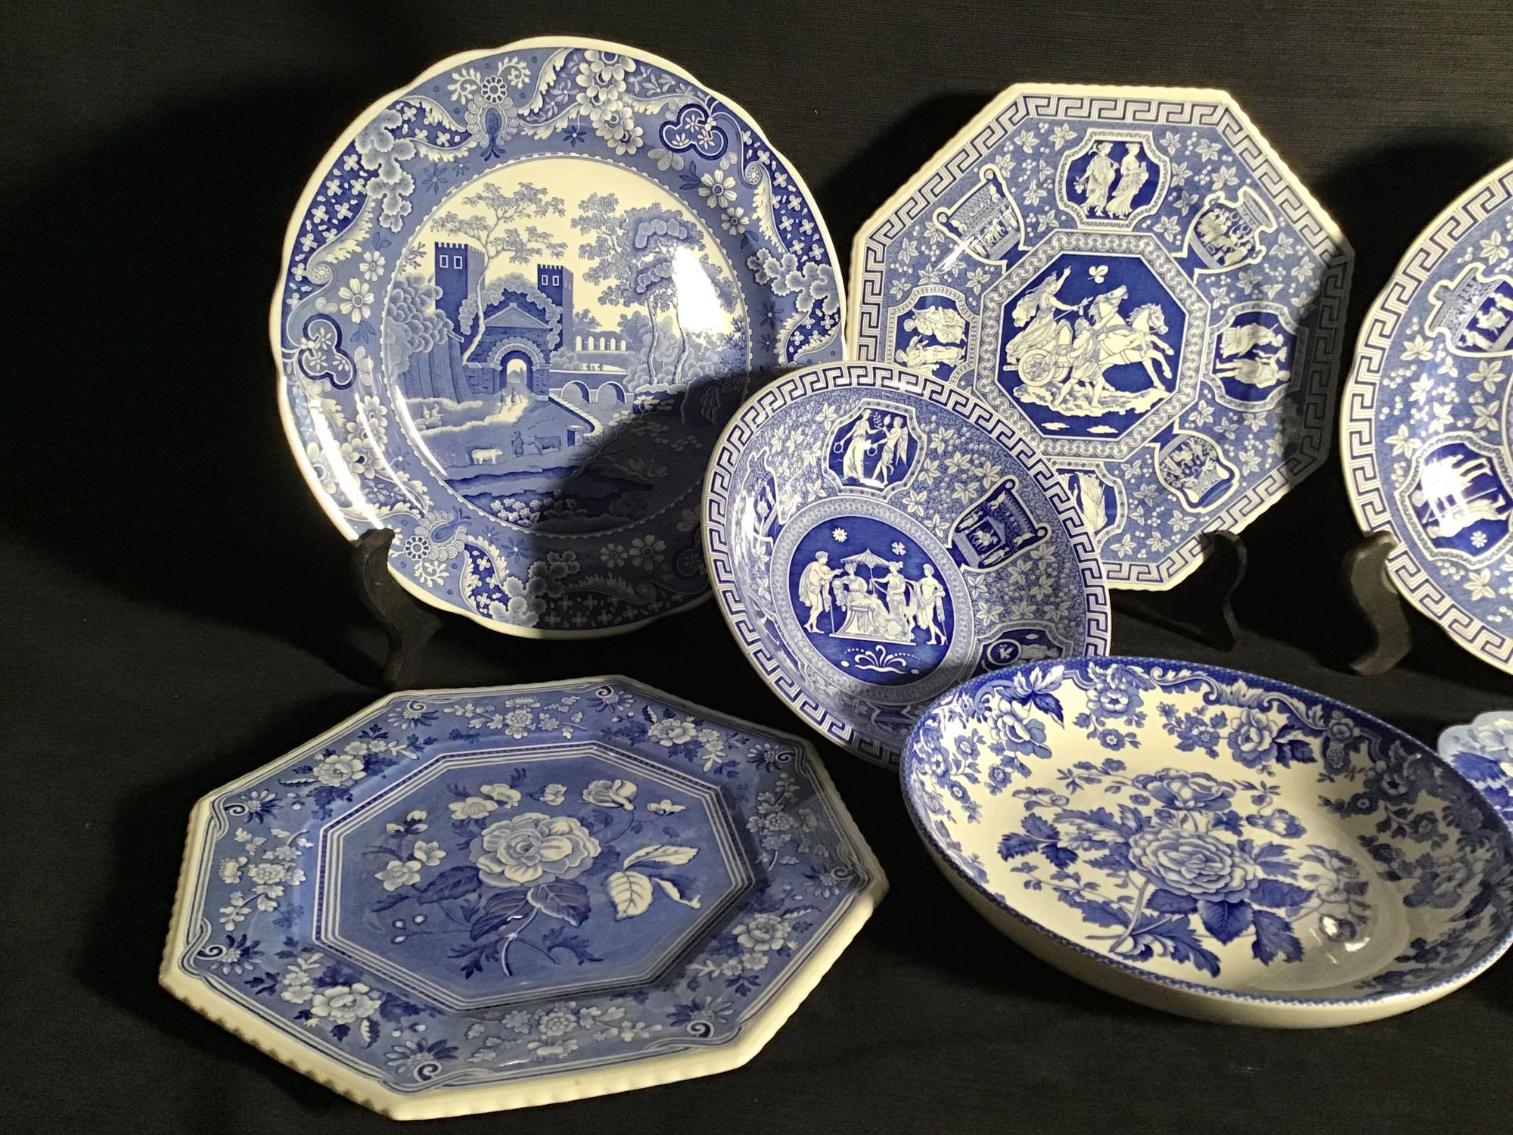 Image for Spode Blue Room Collection